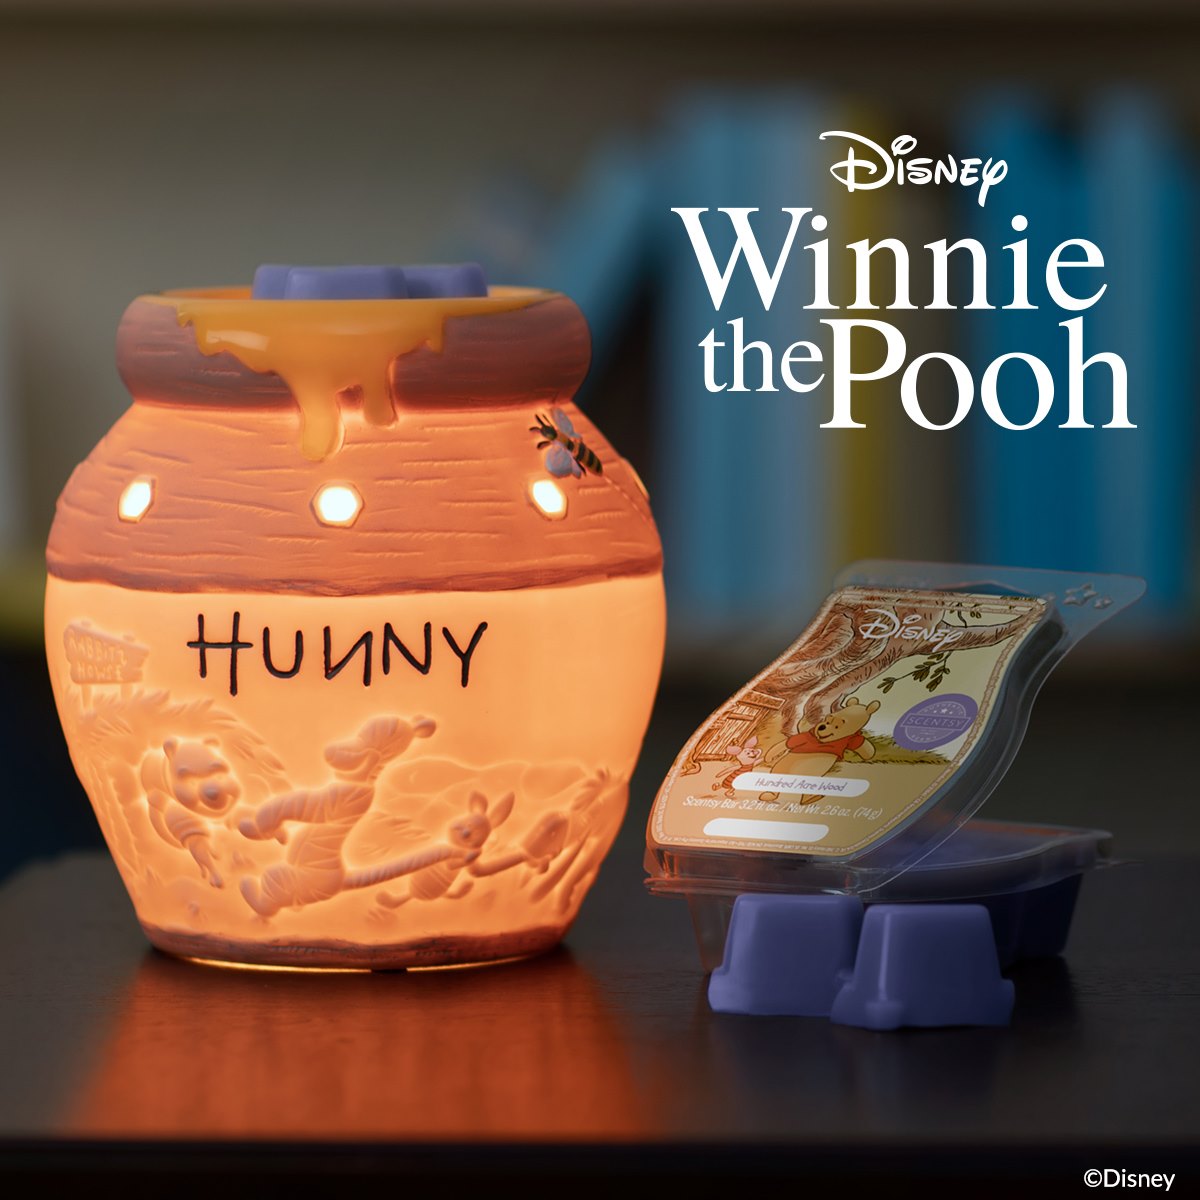 Scentsy Debuts Winnie the Pooh Hunny Warmer and Brings Back Some Disney  Favorites - LaughingPlace.com